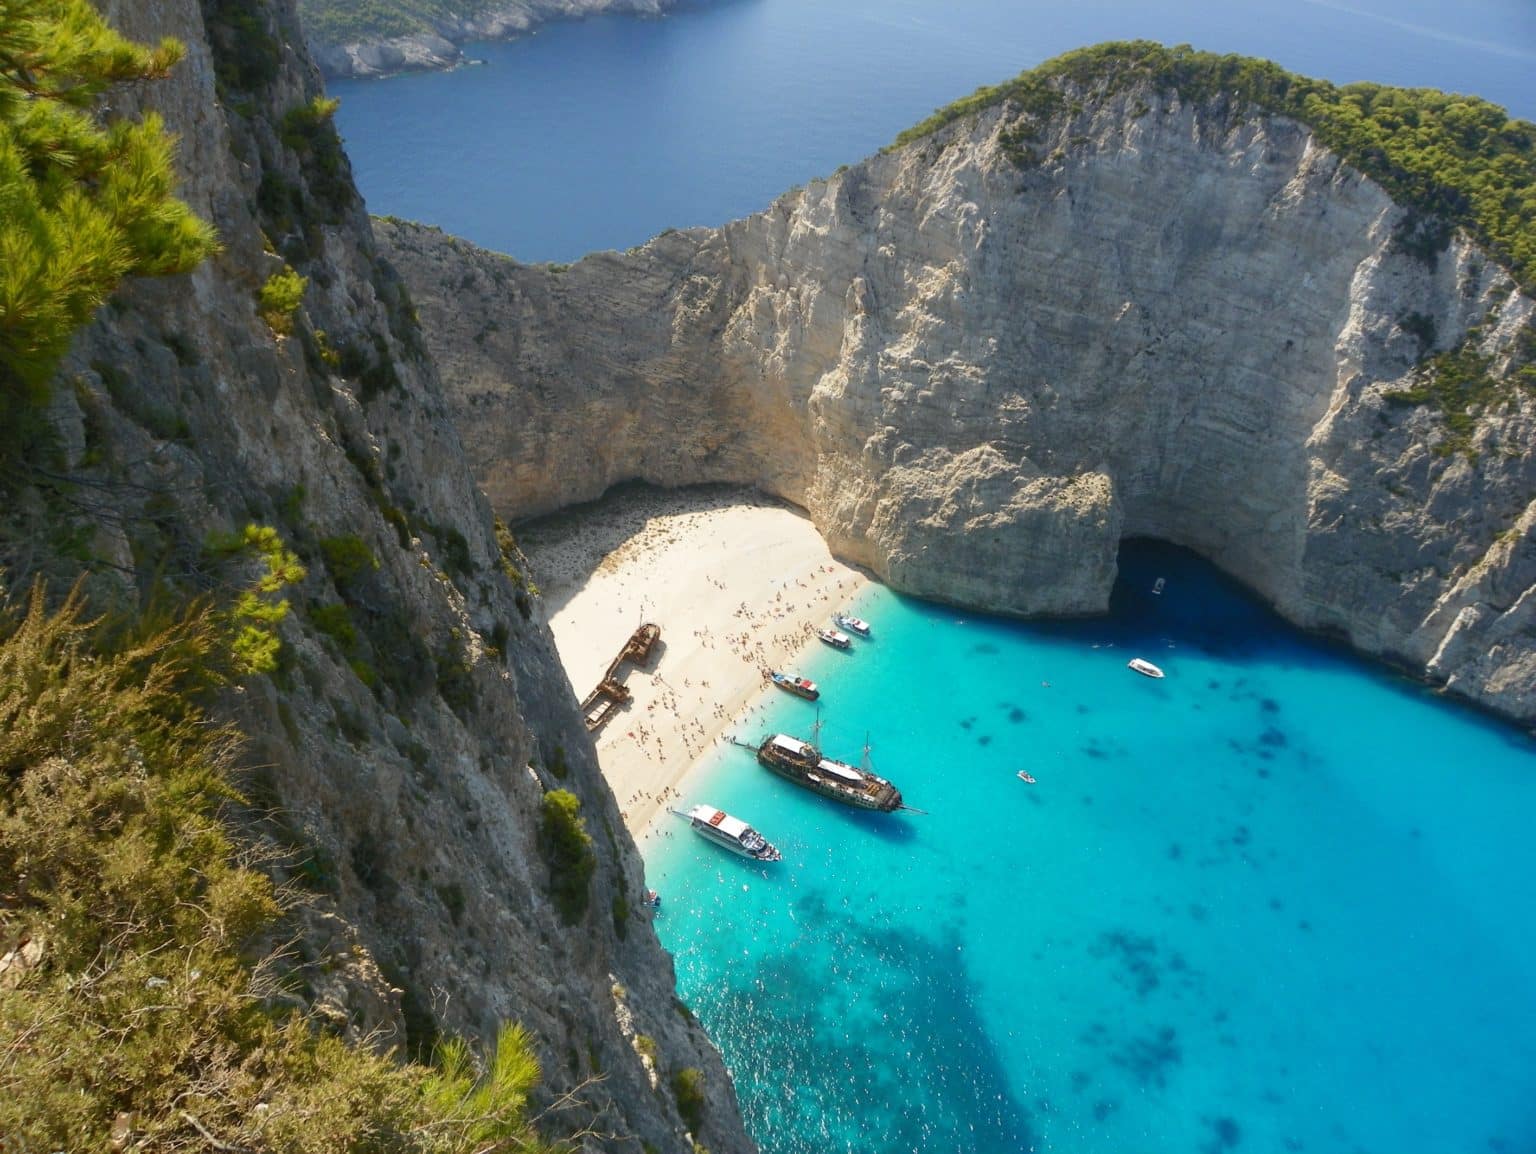 THE IONIAN ISLANDS